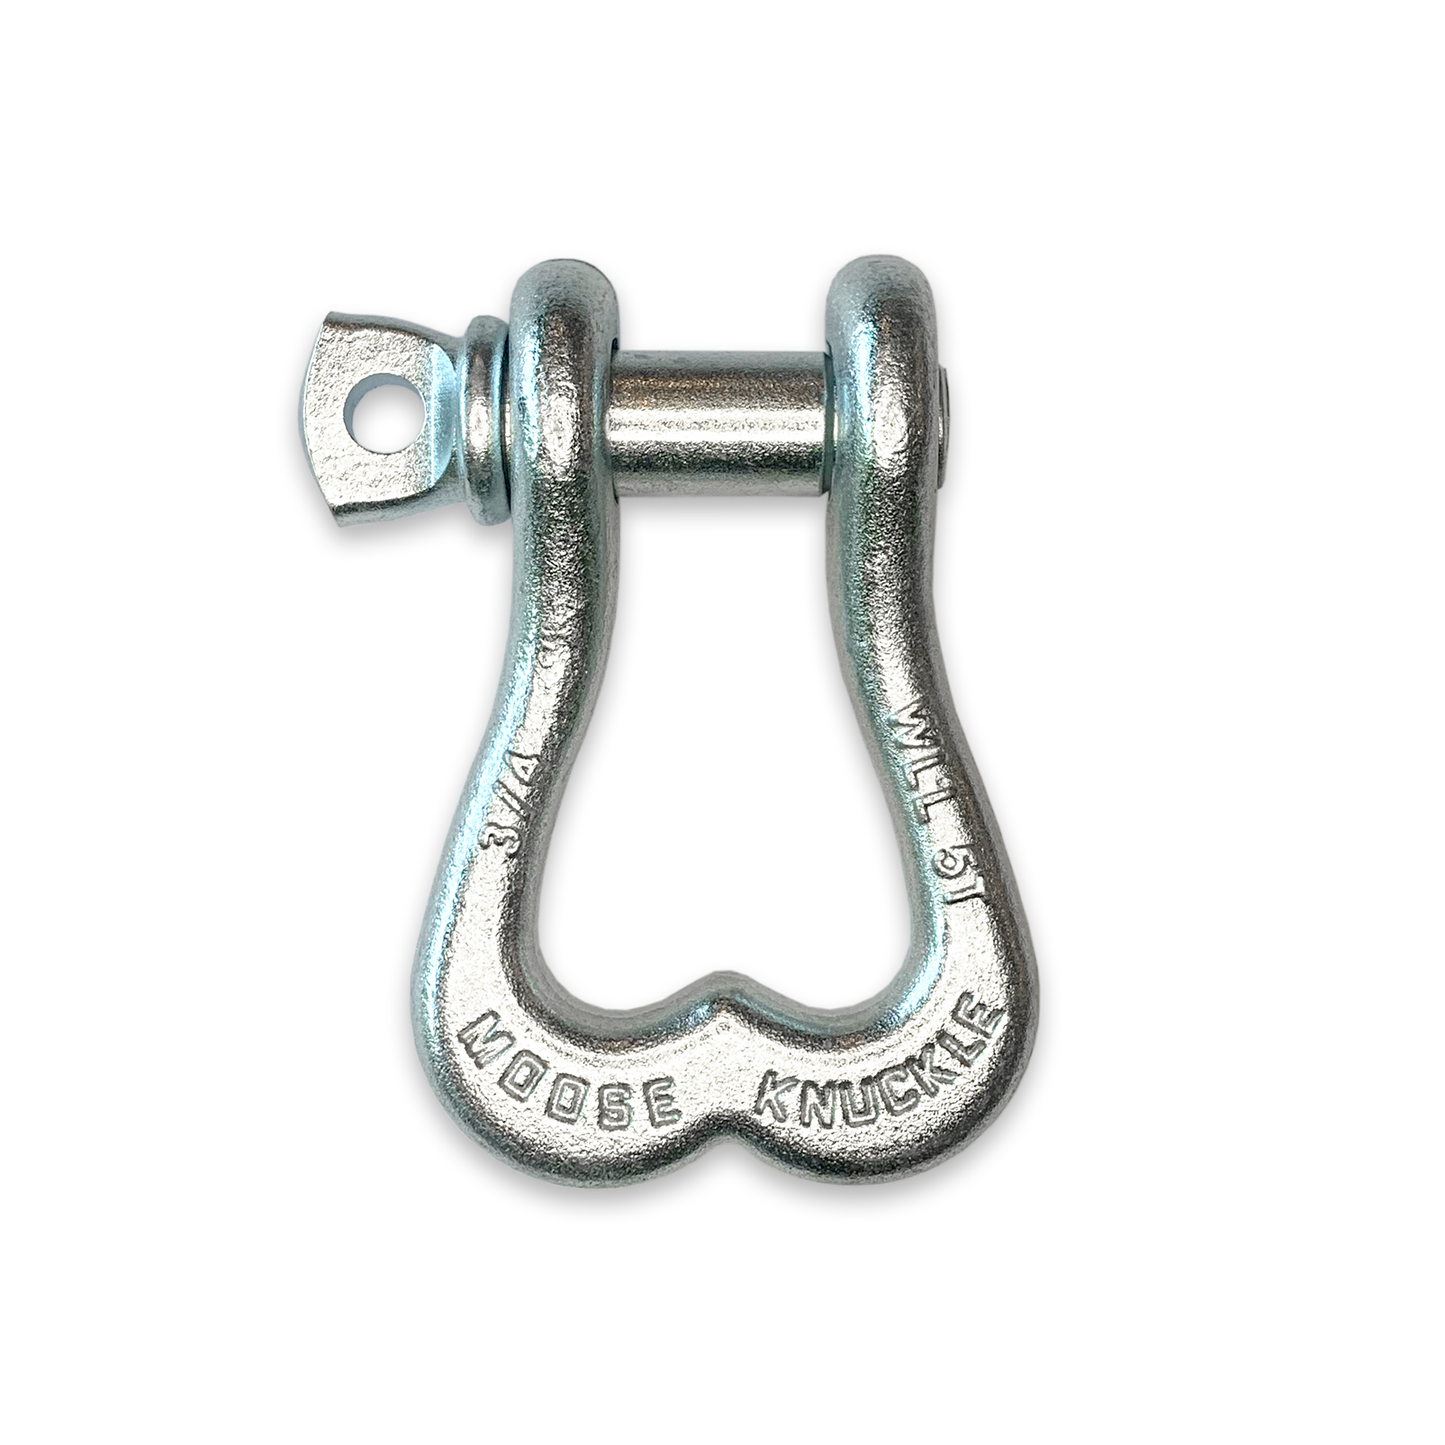 Moose Knuckle XL Nice Gal Galvanized D-Ring 3/4" Shackle for Towing Off-Road Jeep, Tacoma, 4-Runner, 4x4 Truck and SxS Vehicle Recovery